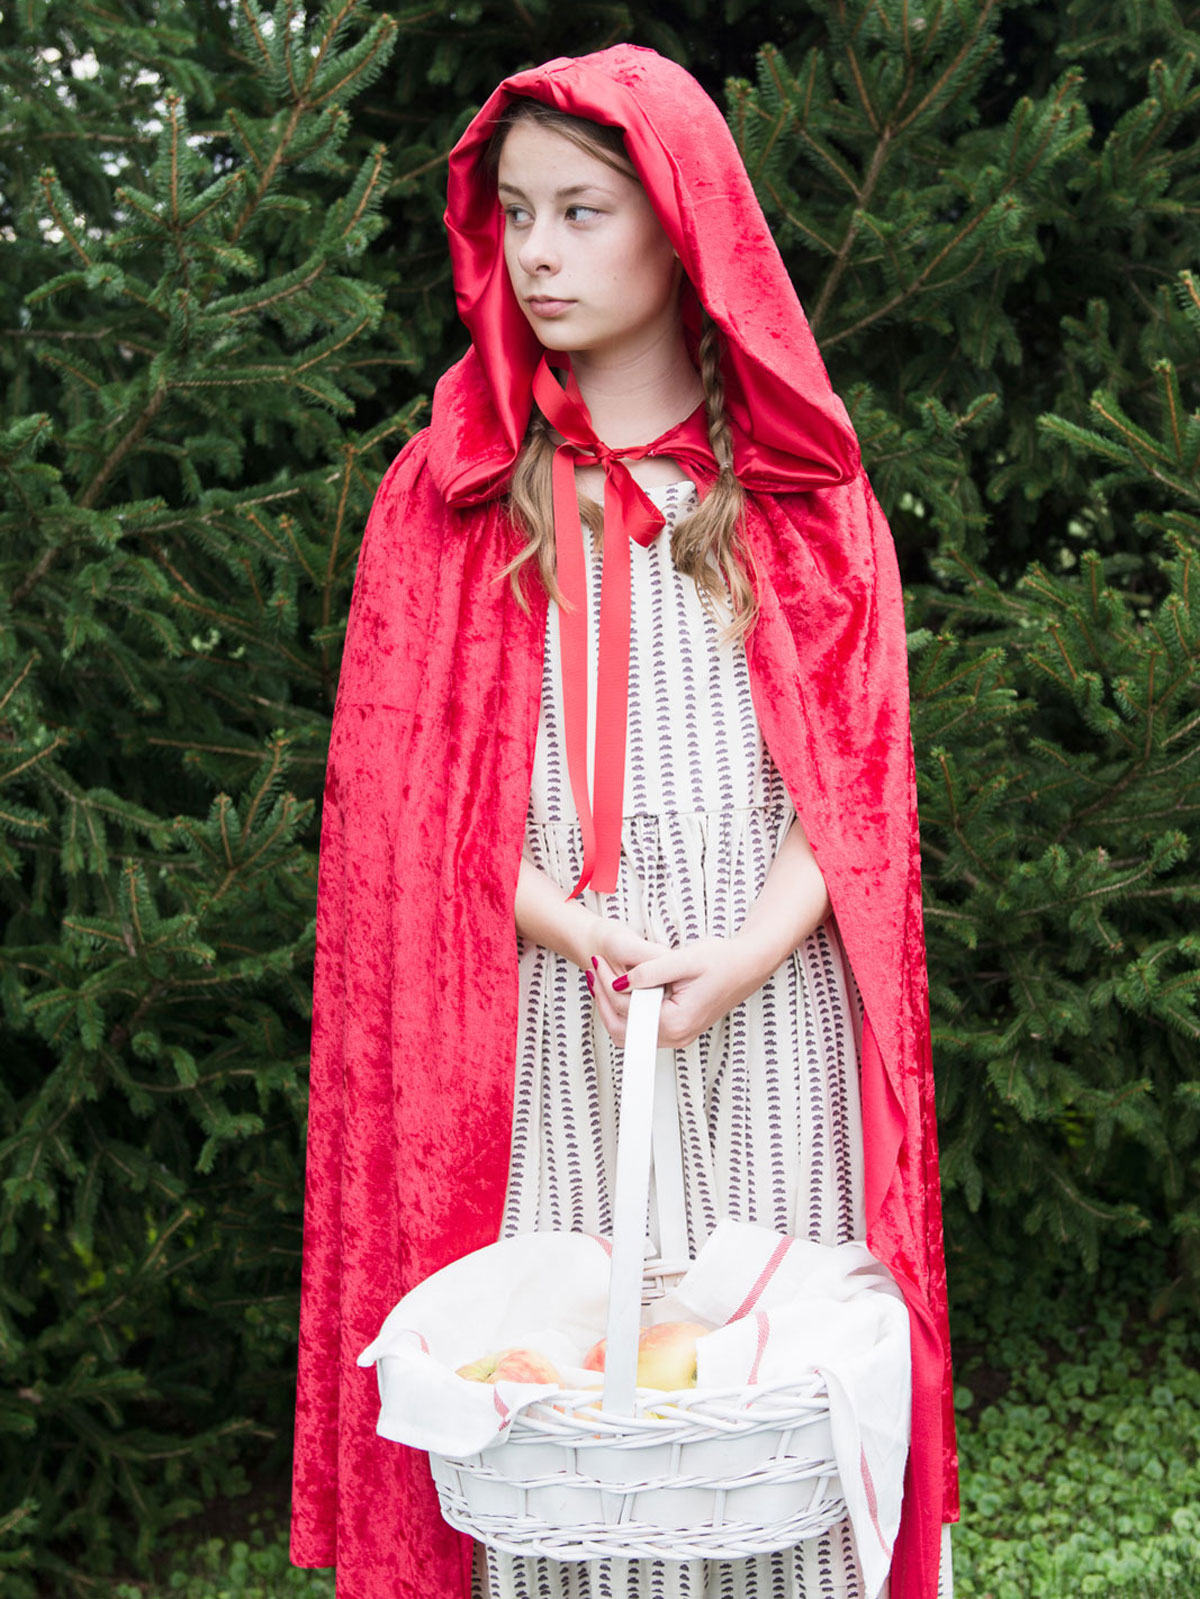 How to make a hooded cape for halloween gail's blog